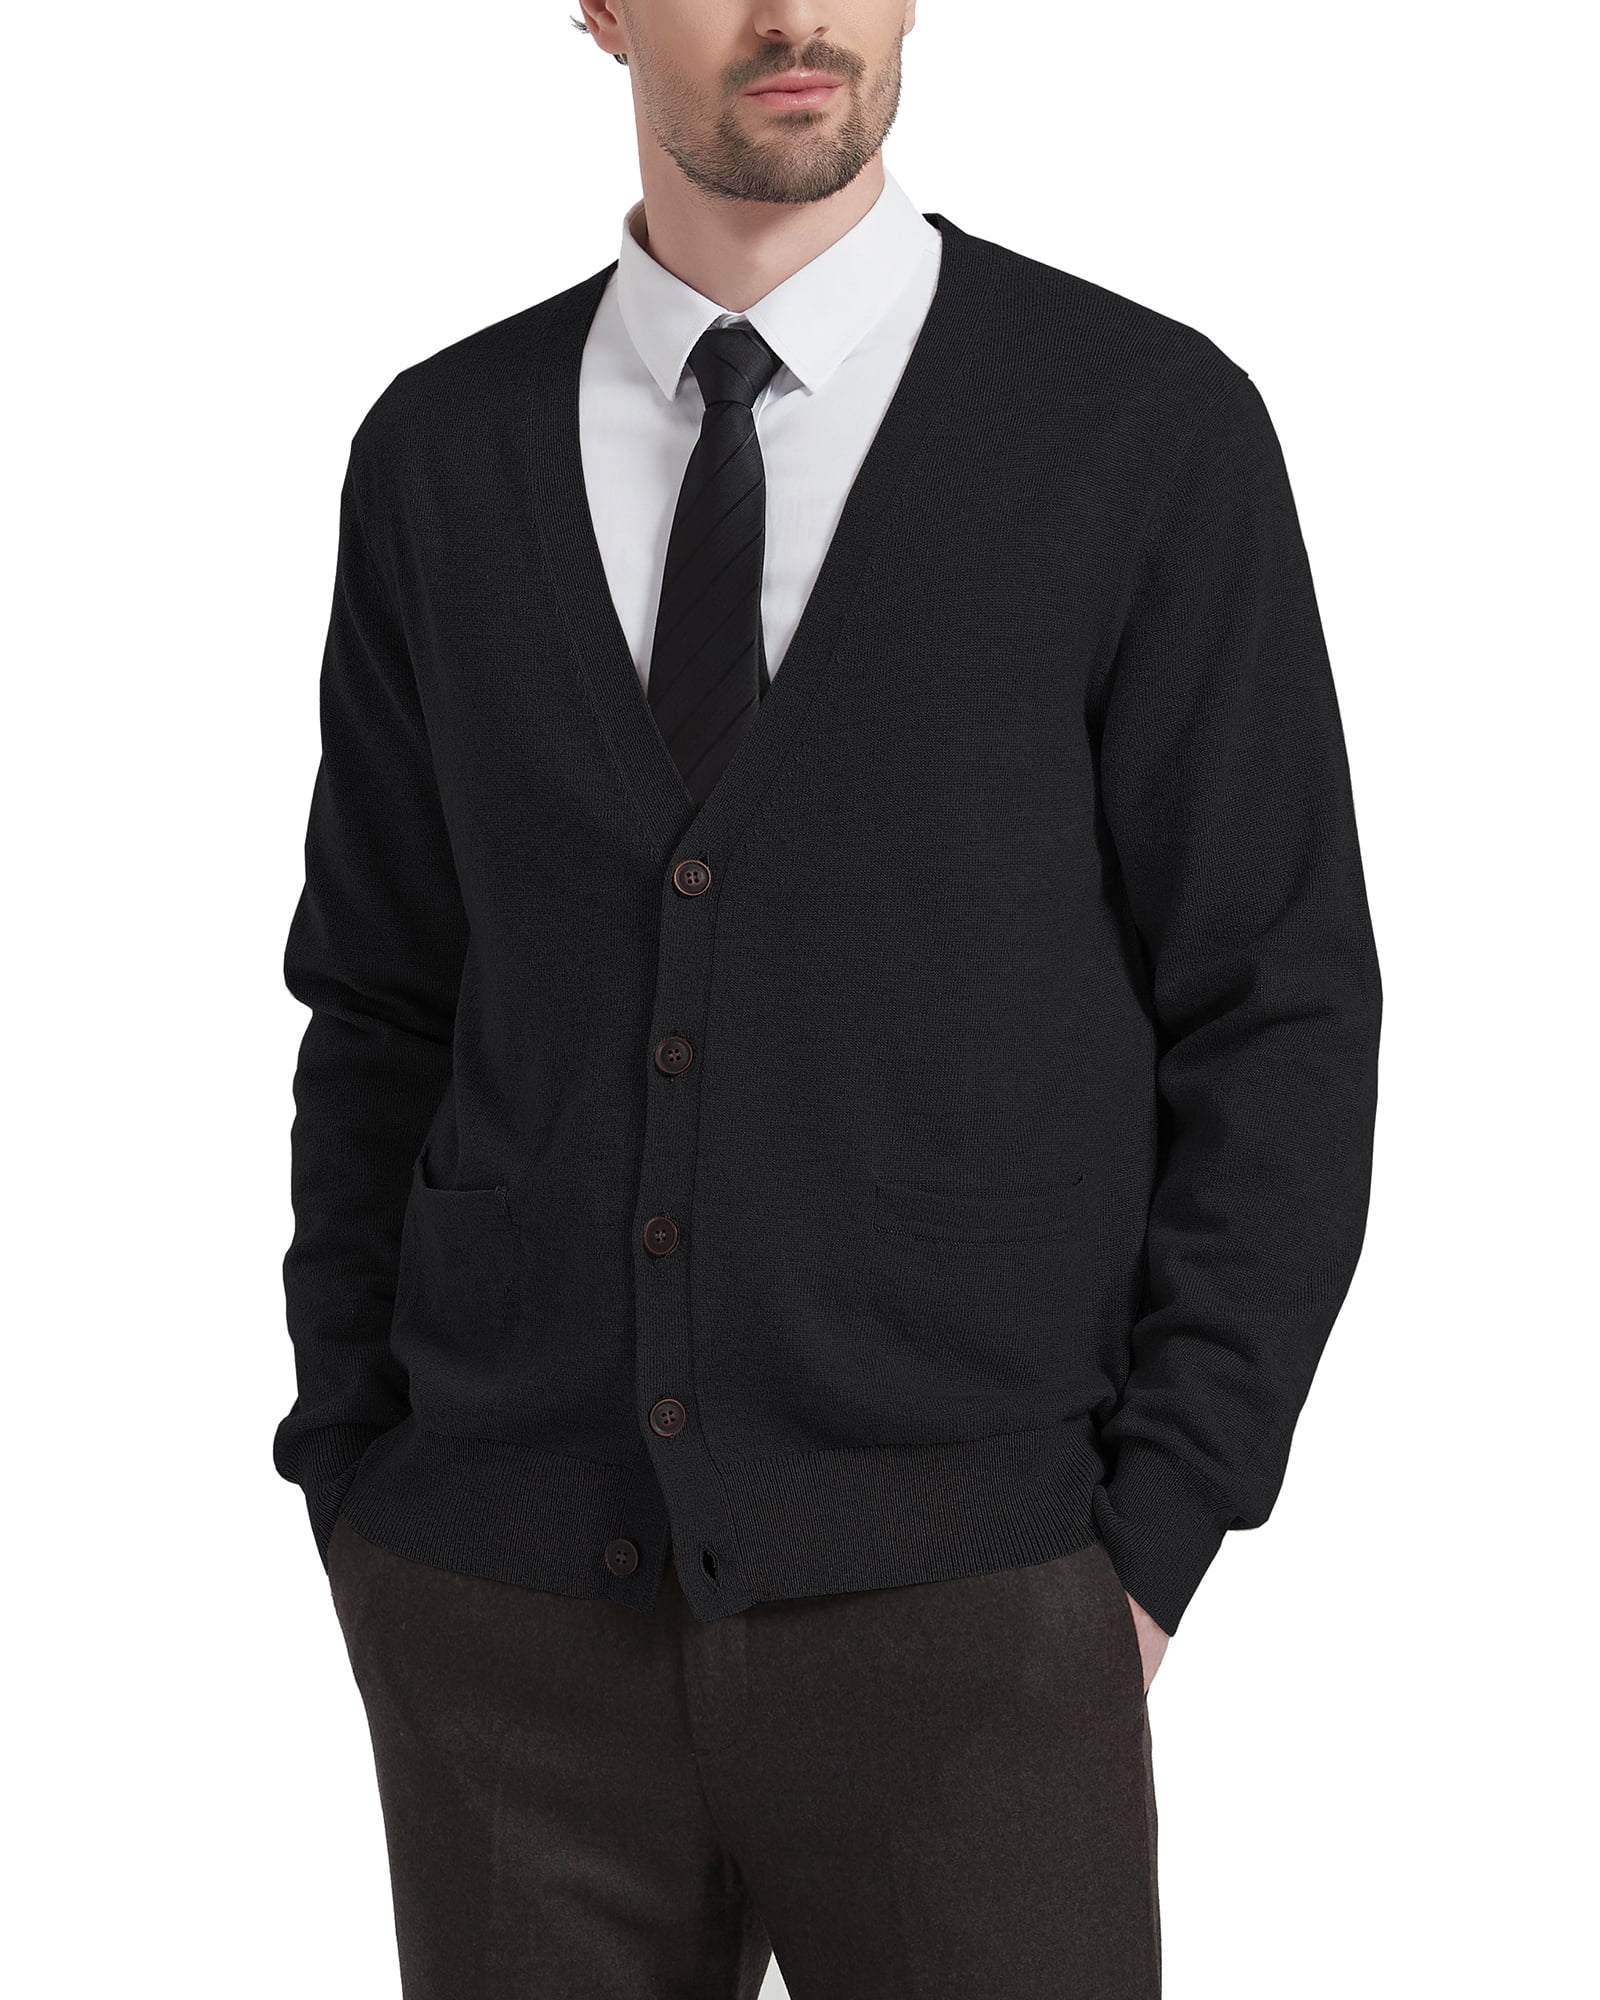 Kallspin Men's Cardigan Sweater Wool Blend V Neck Buttons Cardigan with  Pockets(Black,2X-Large) 